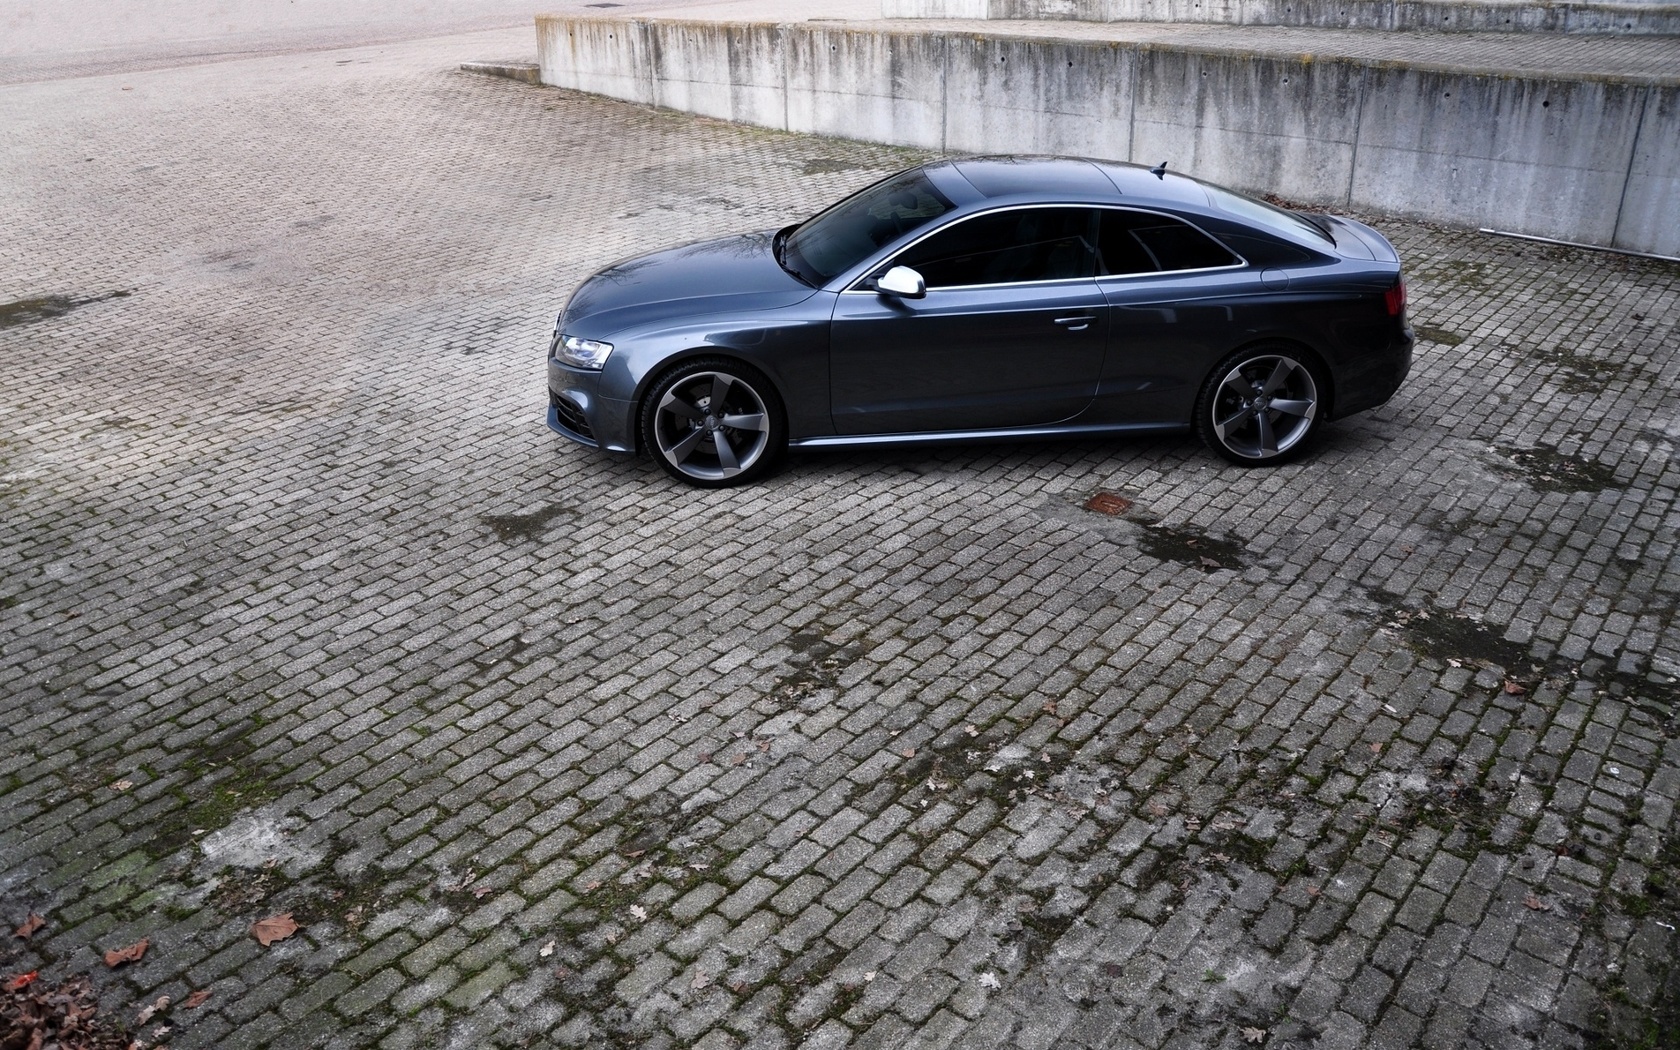  , , , Audi, rs5,  , auto wallpapers, cars